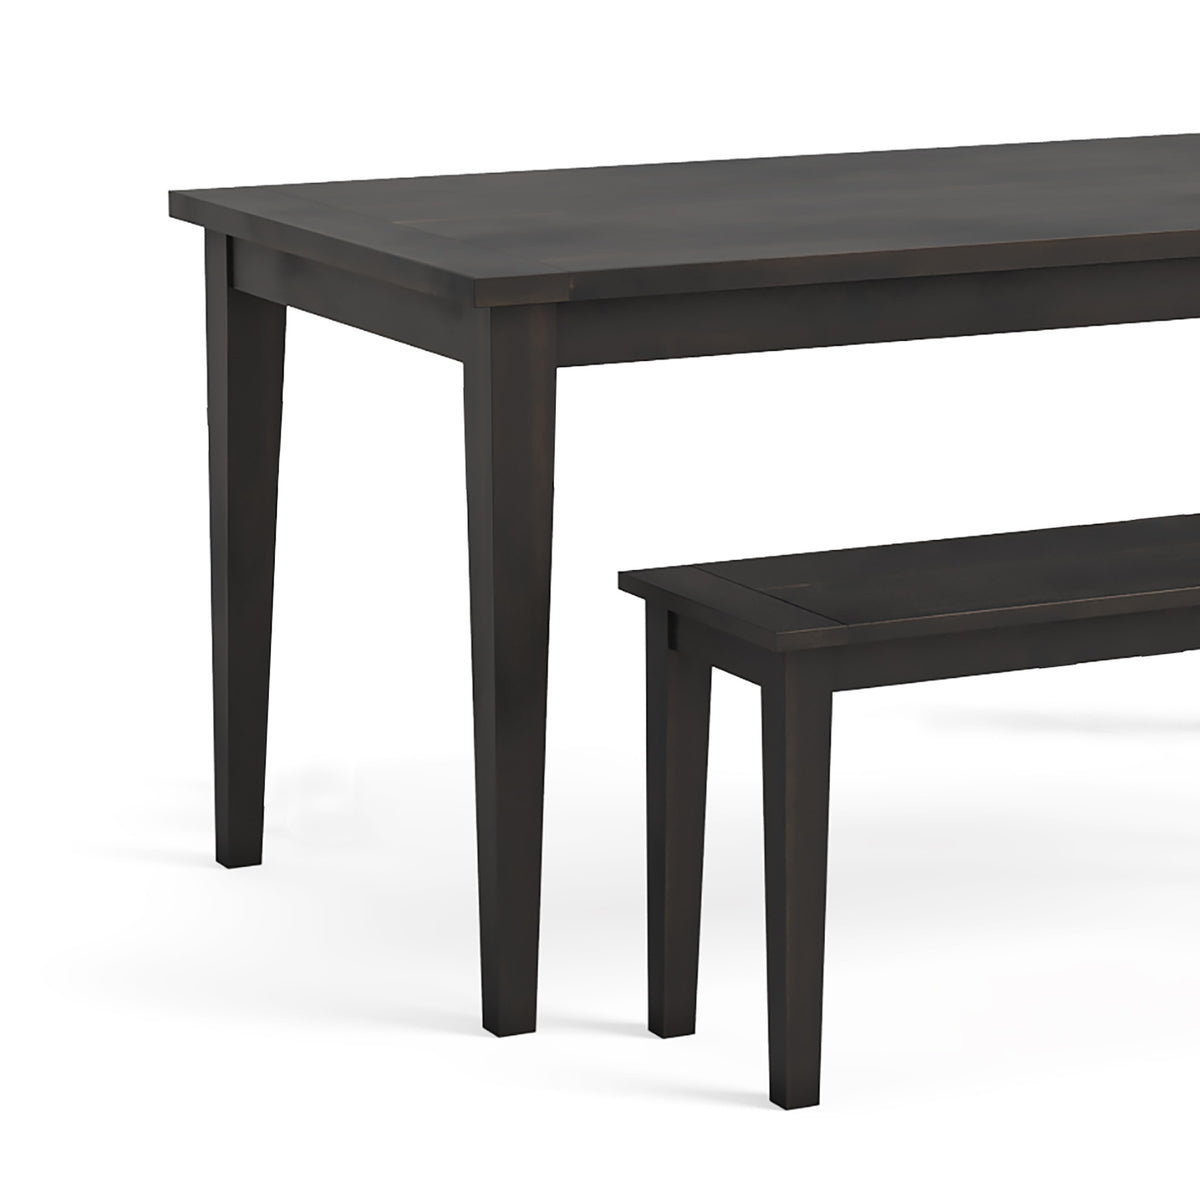 Elise Noir Black Acacia Dining Set with Benches close up of table top